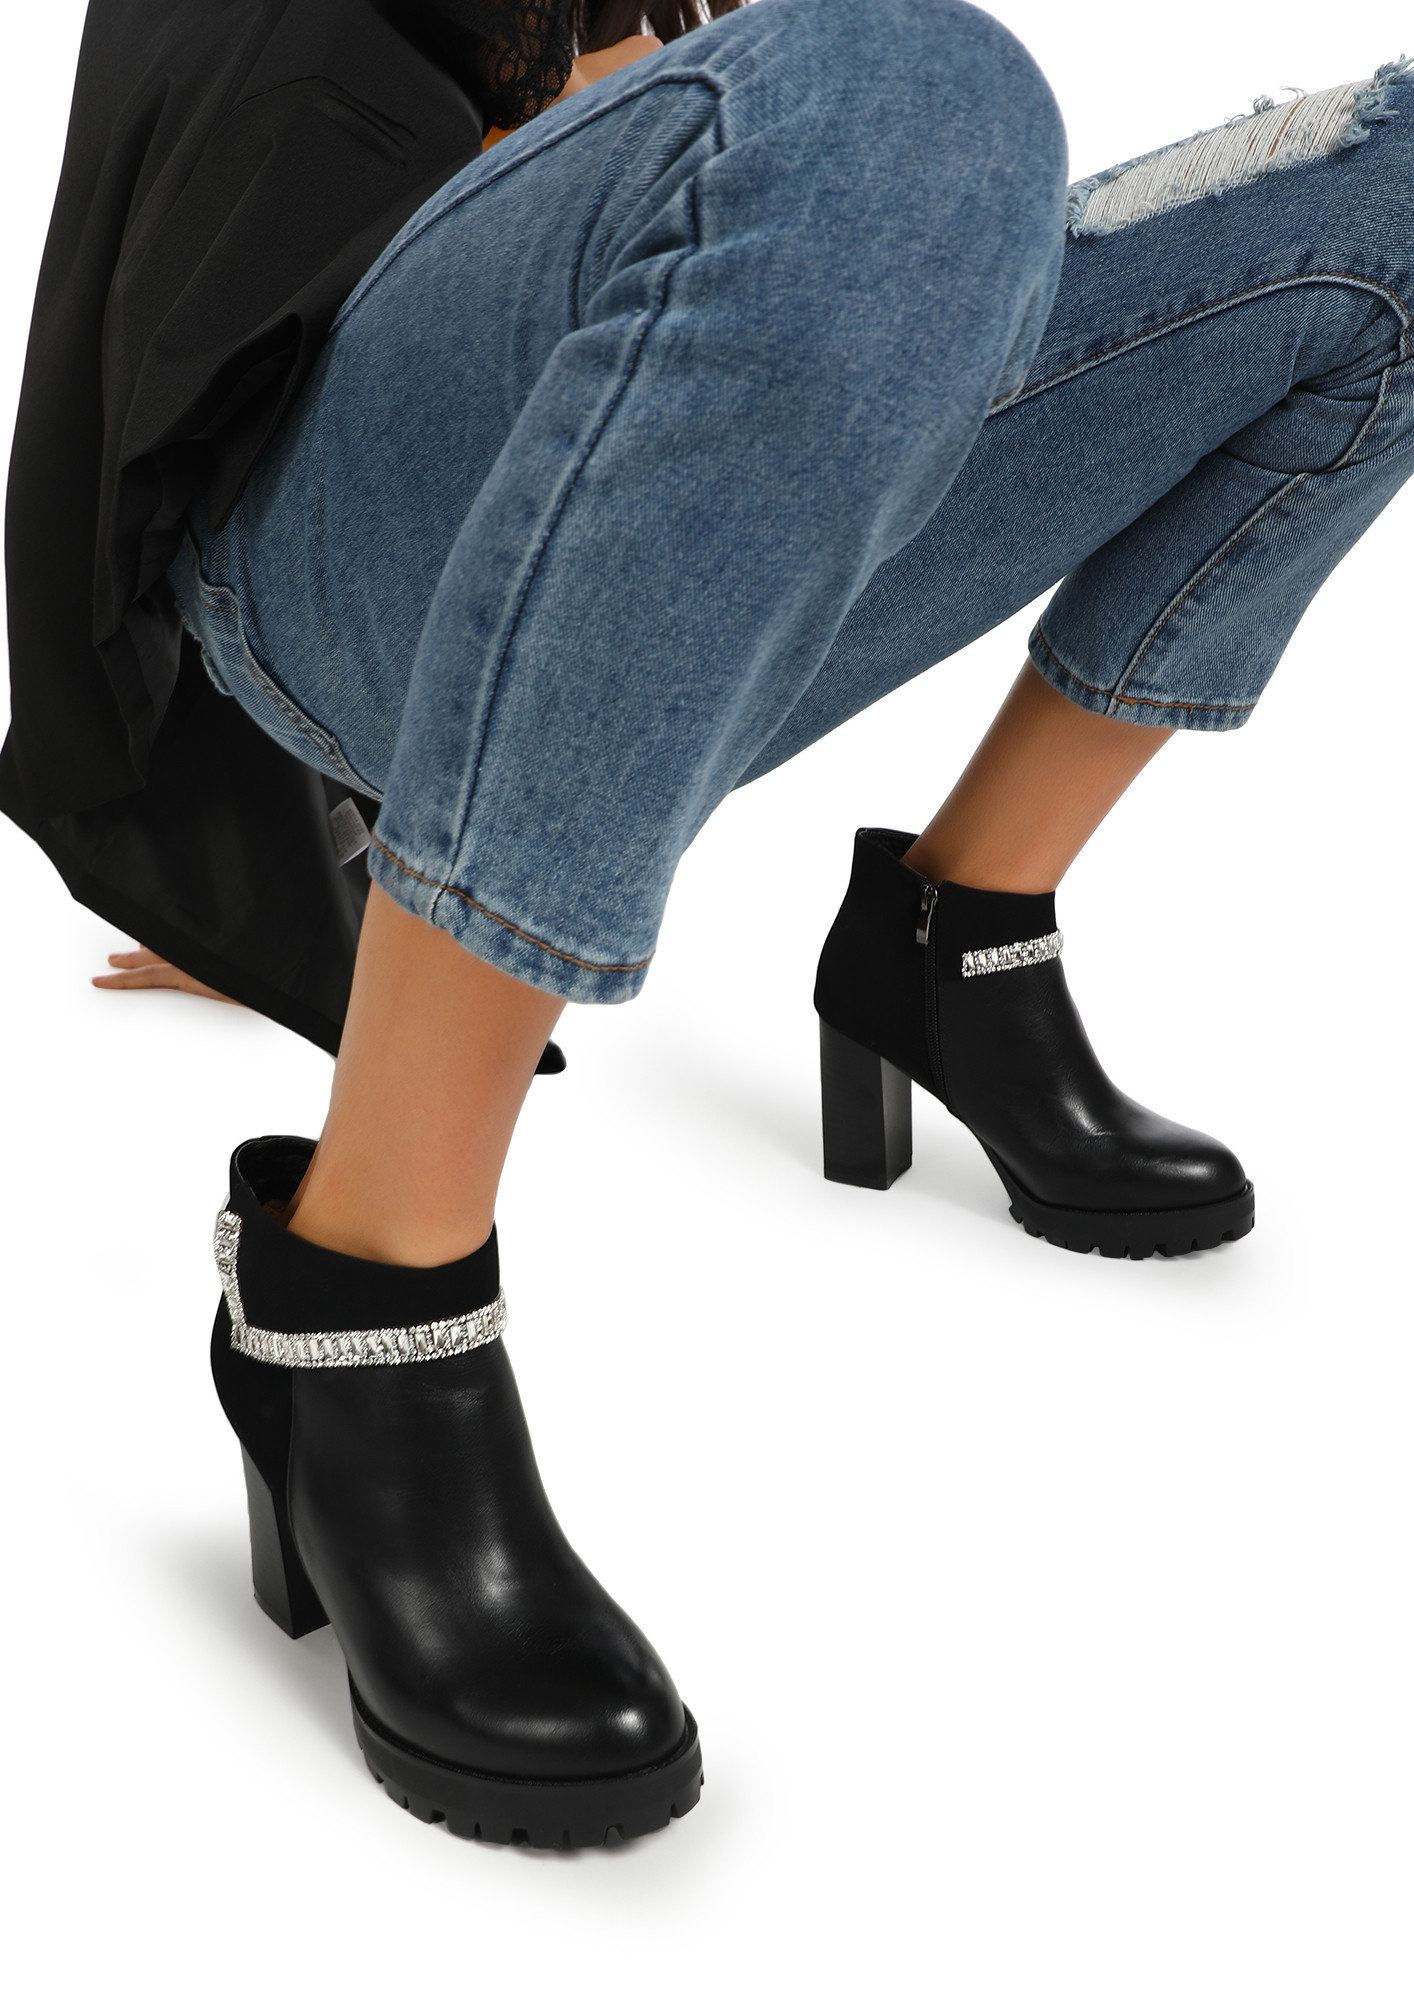 CITY STROLLING BLACK ANKLE BOOTS